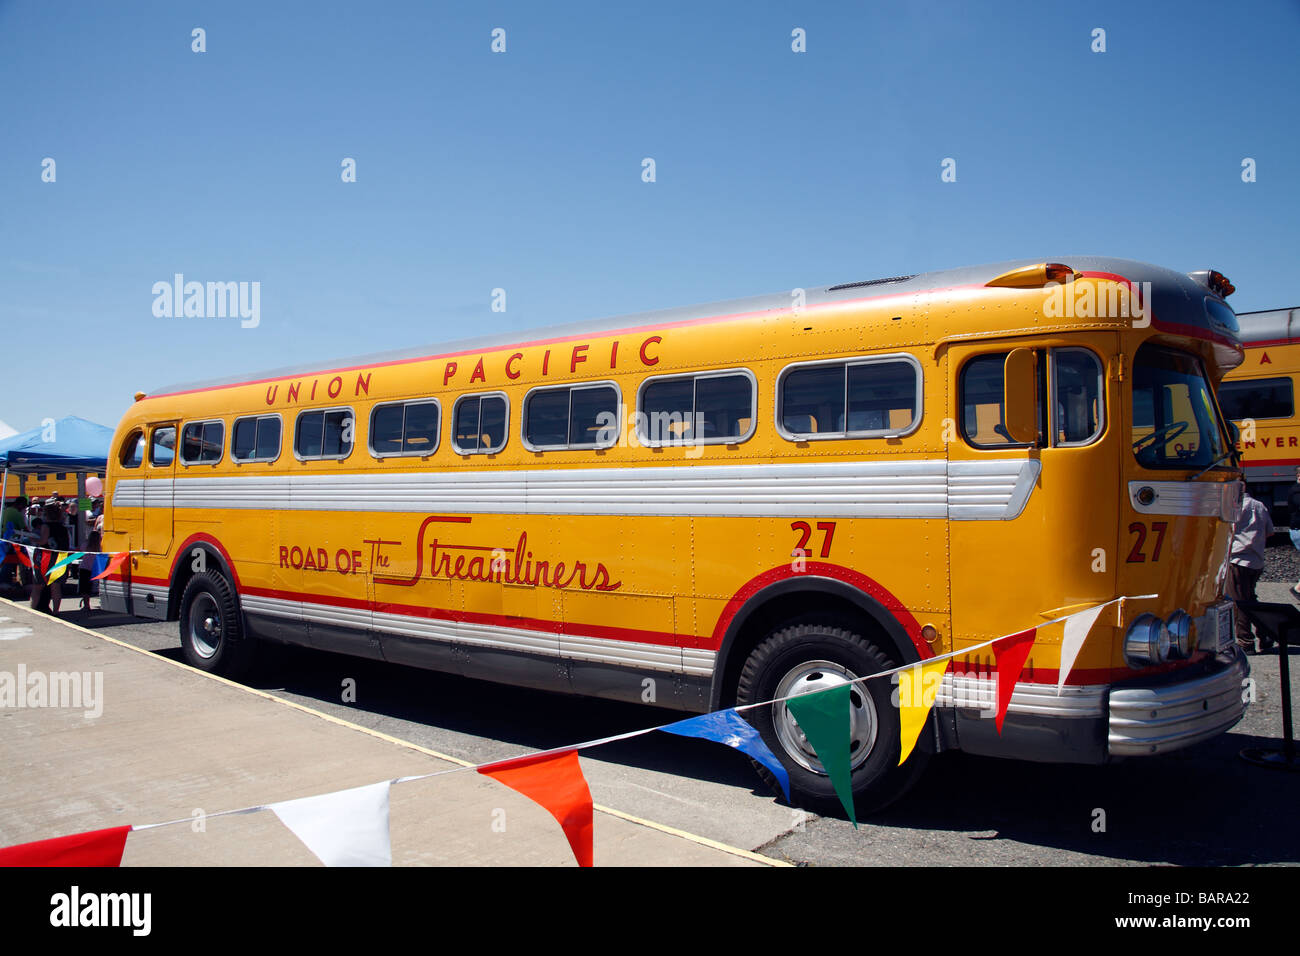 Union Pacific Railroad Bus No 27 on display in Roseville California USA Stock Photo